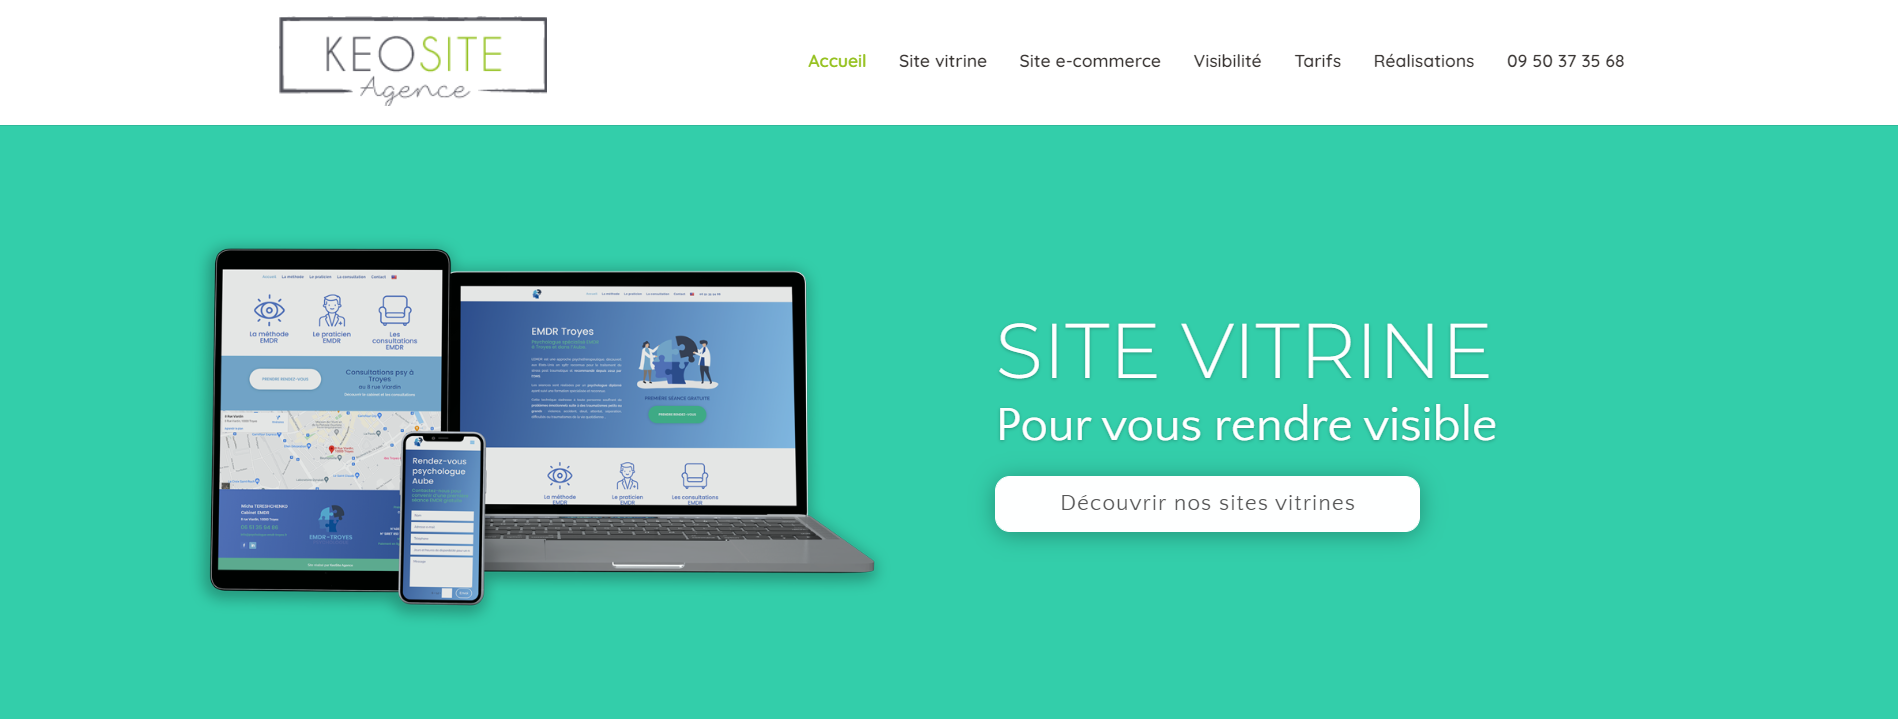 KeoSite - Agence Web à Troyes 